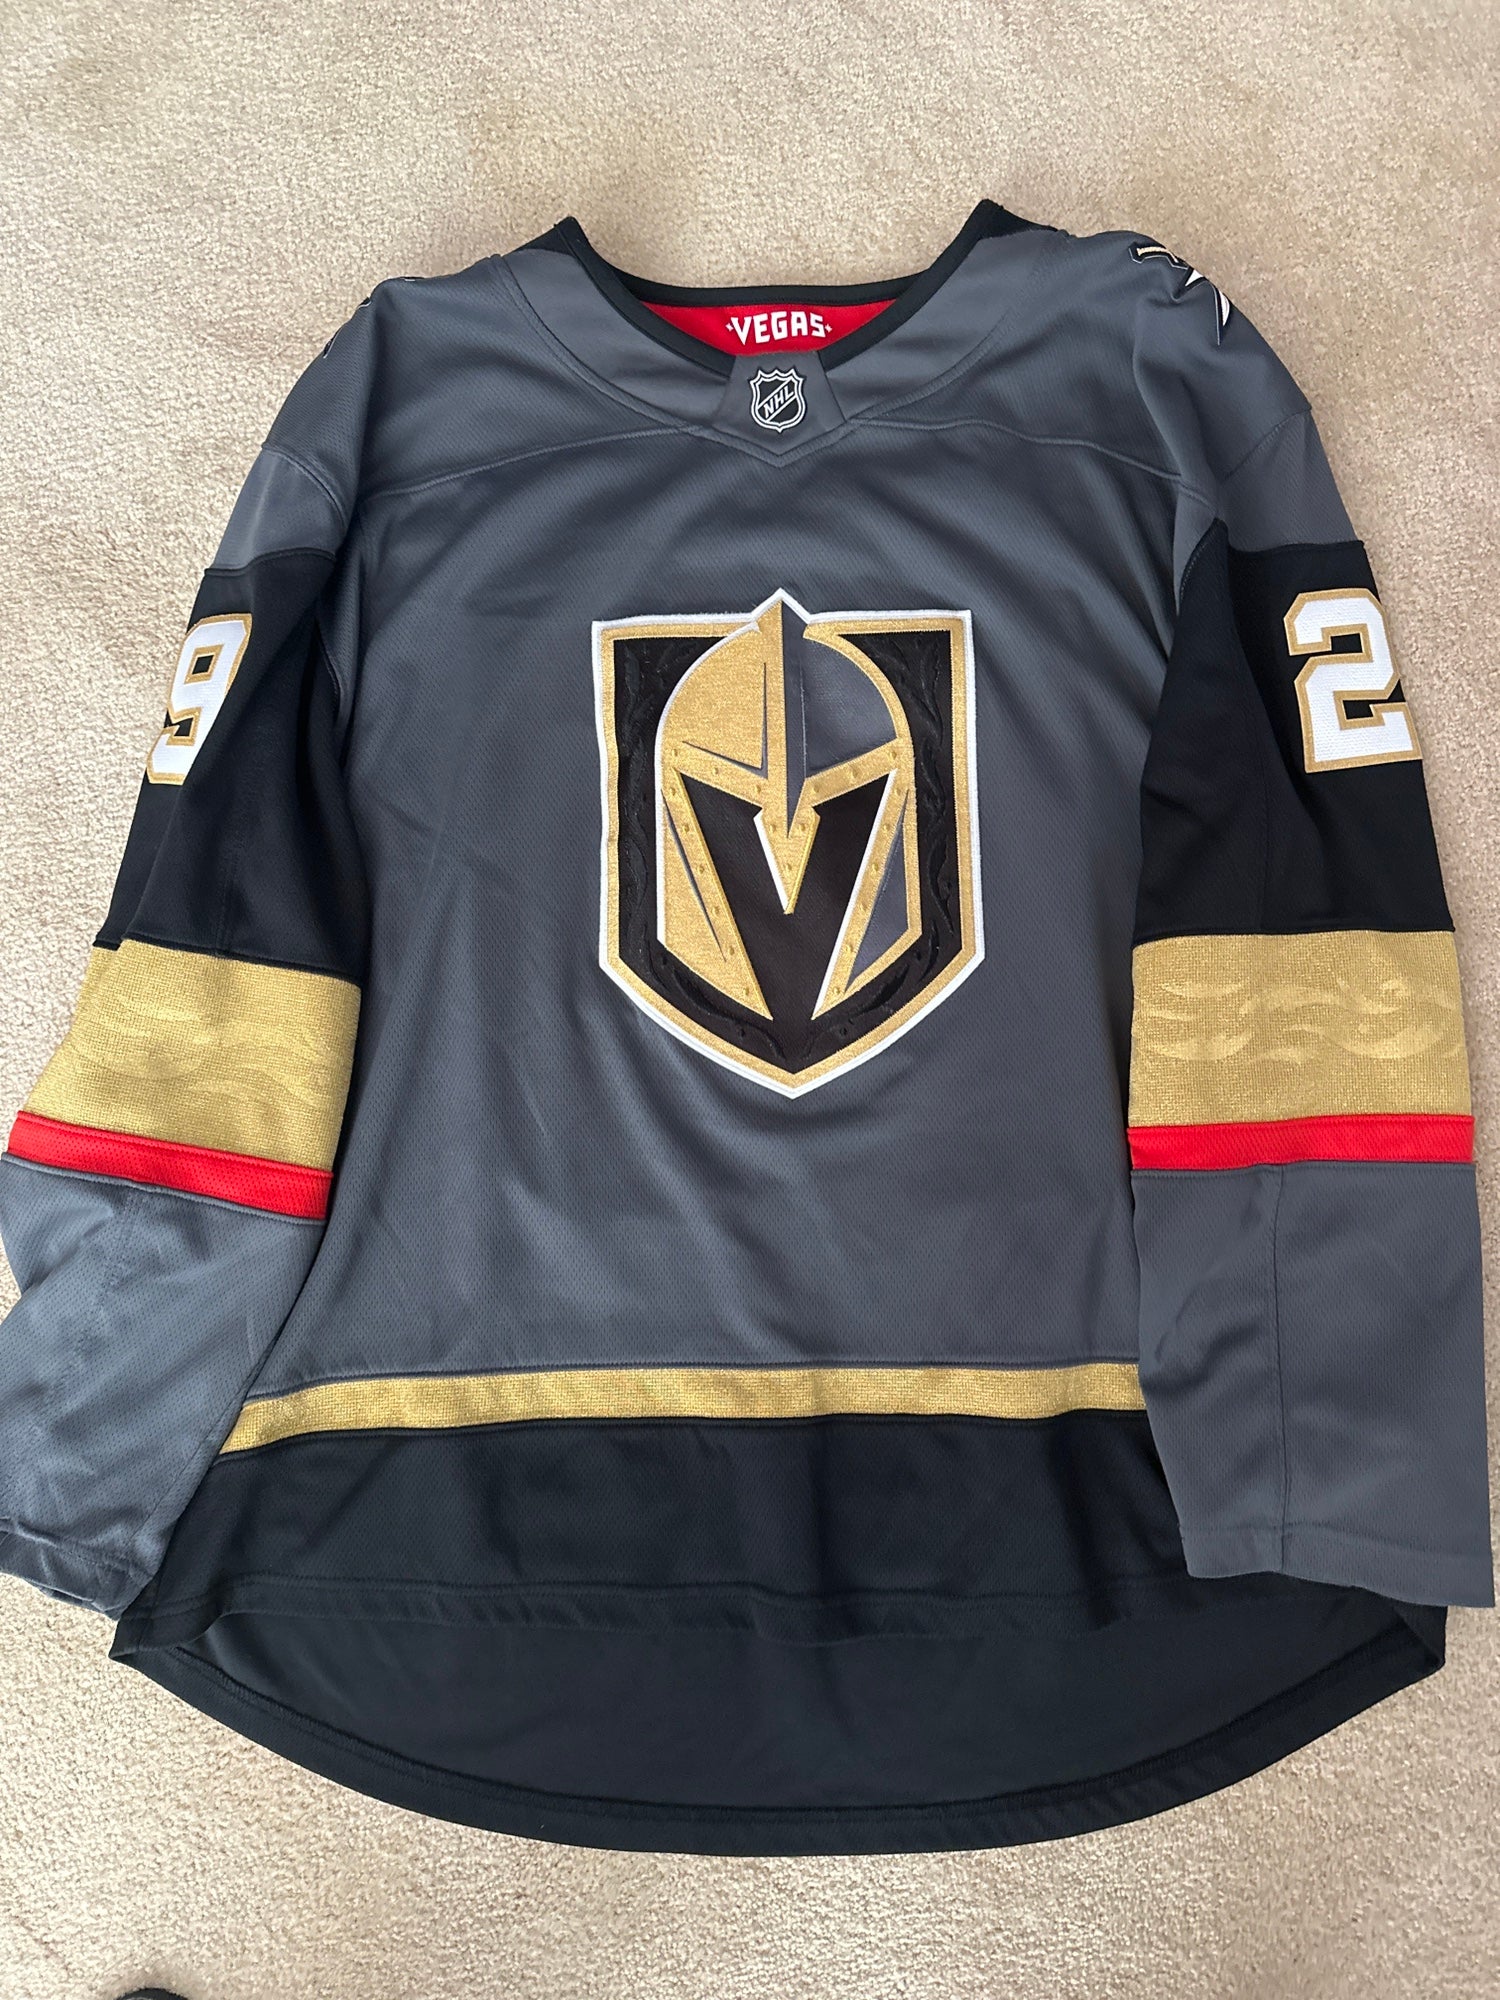 Vegas Golden Knights Deals, Knights Apparel on Sale, Discounted